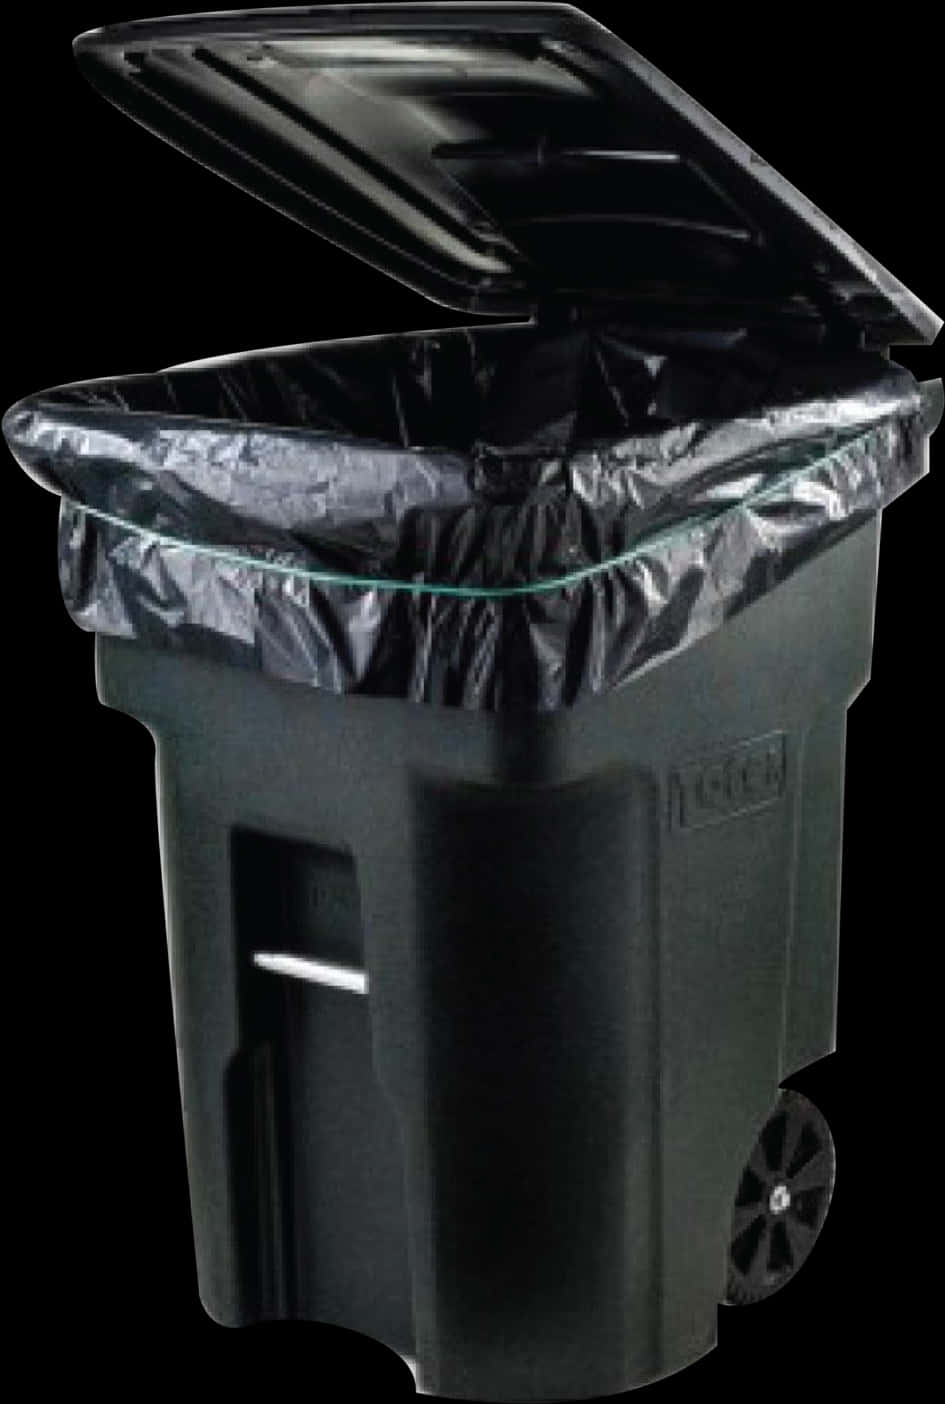 A Black Garbage Can With A Lid